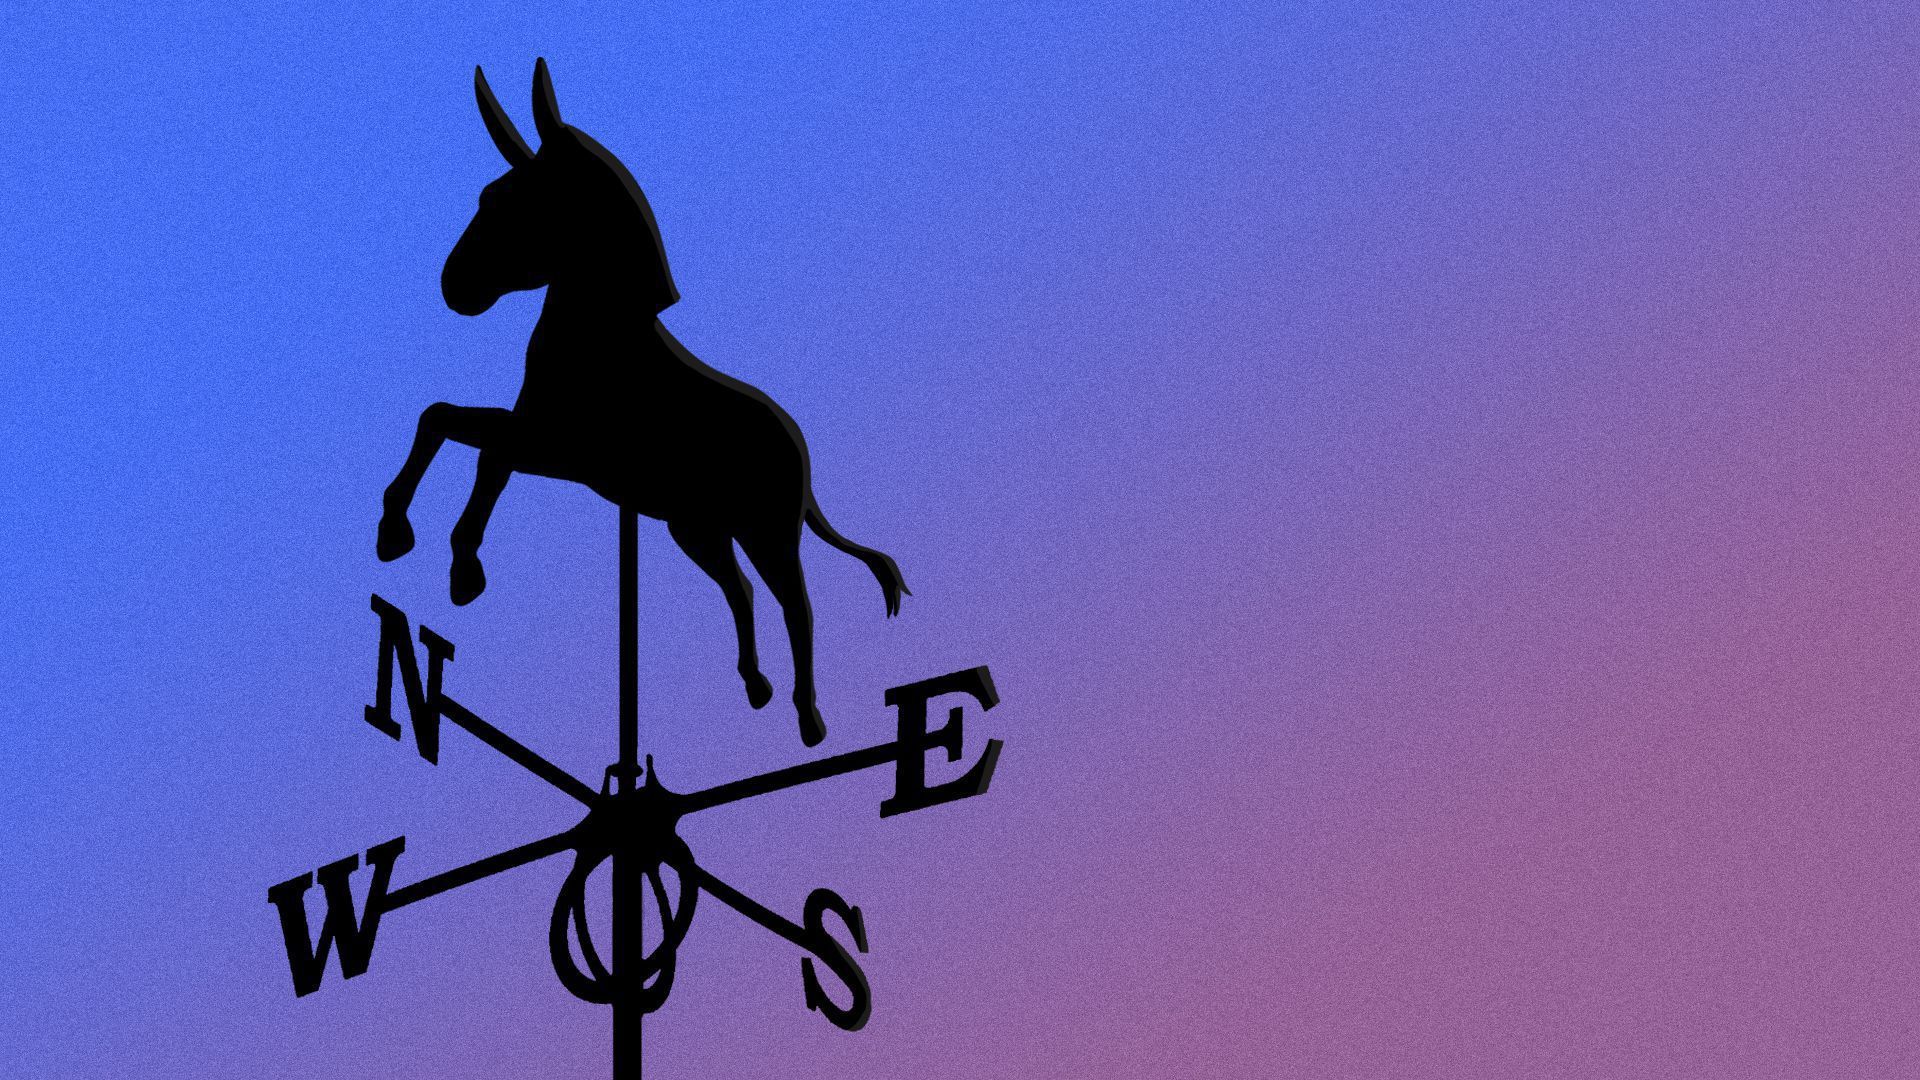 Axios illustration of a donkey atop a weathervane